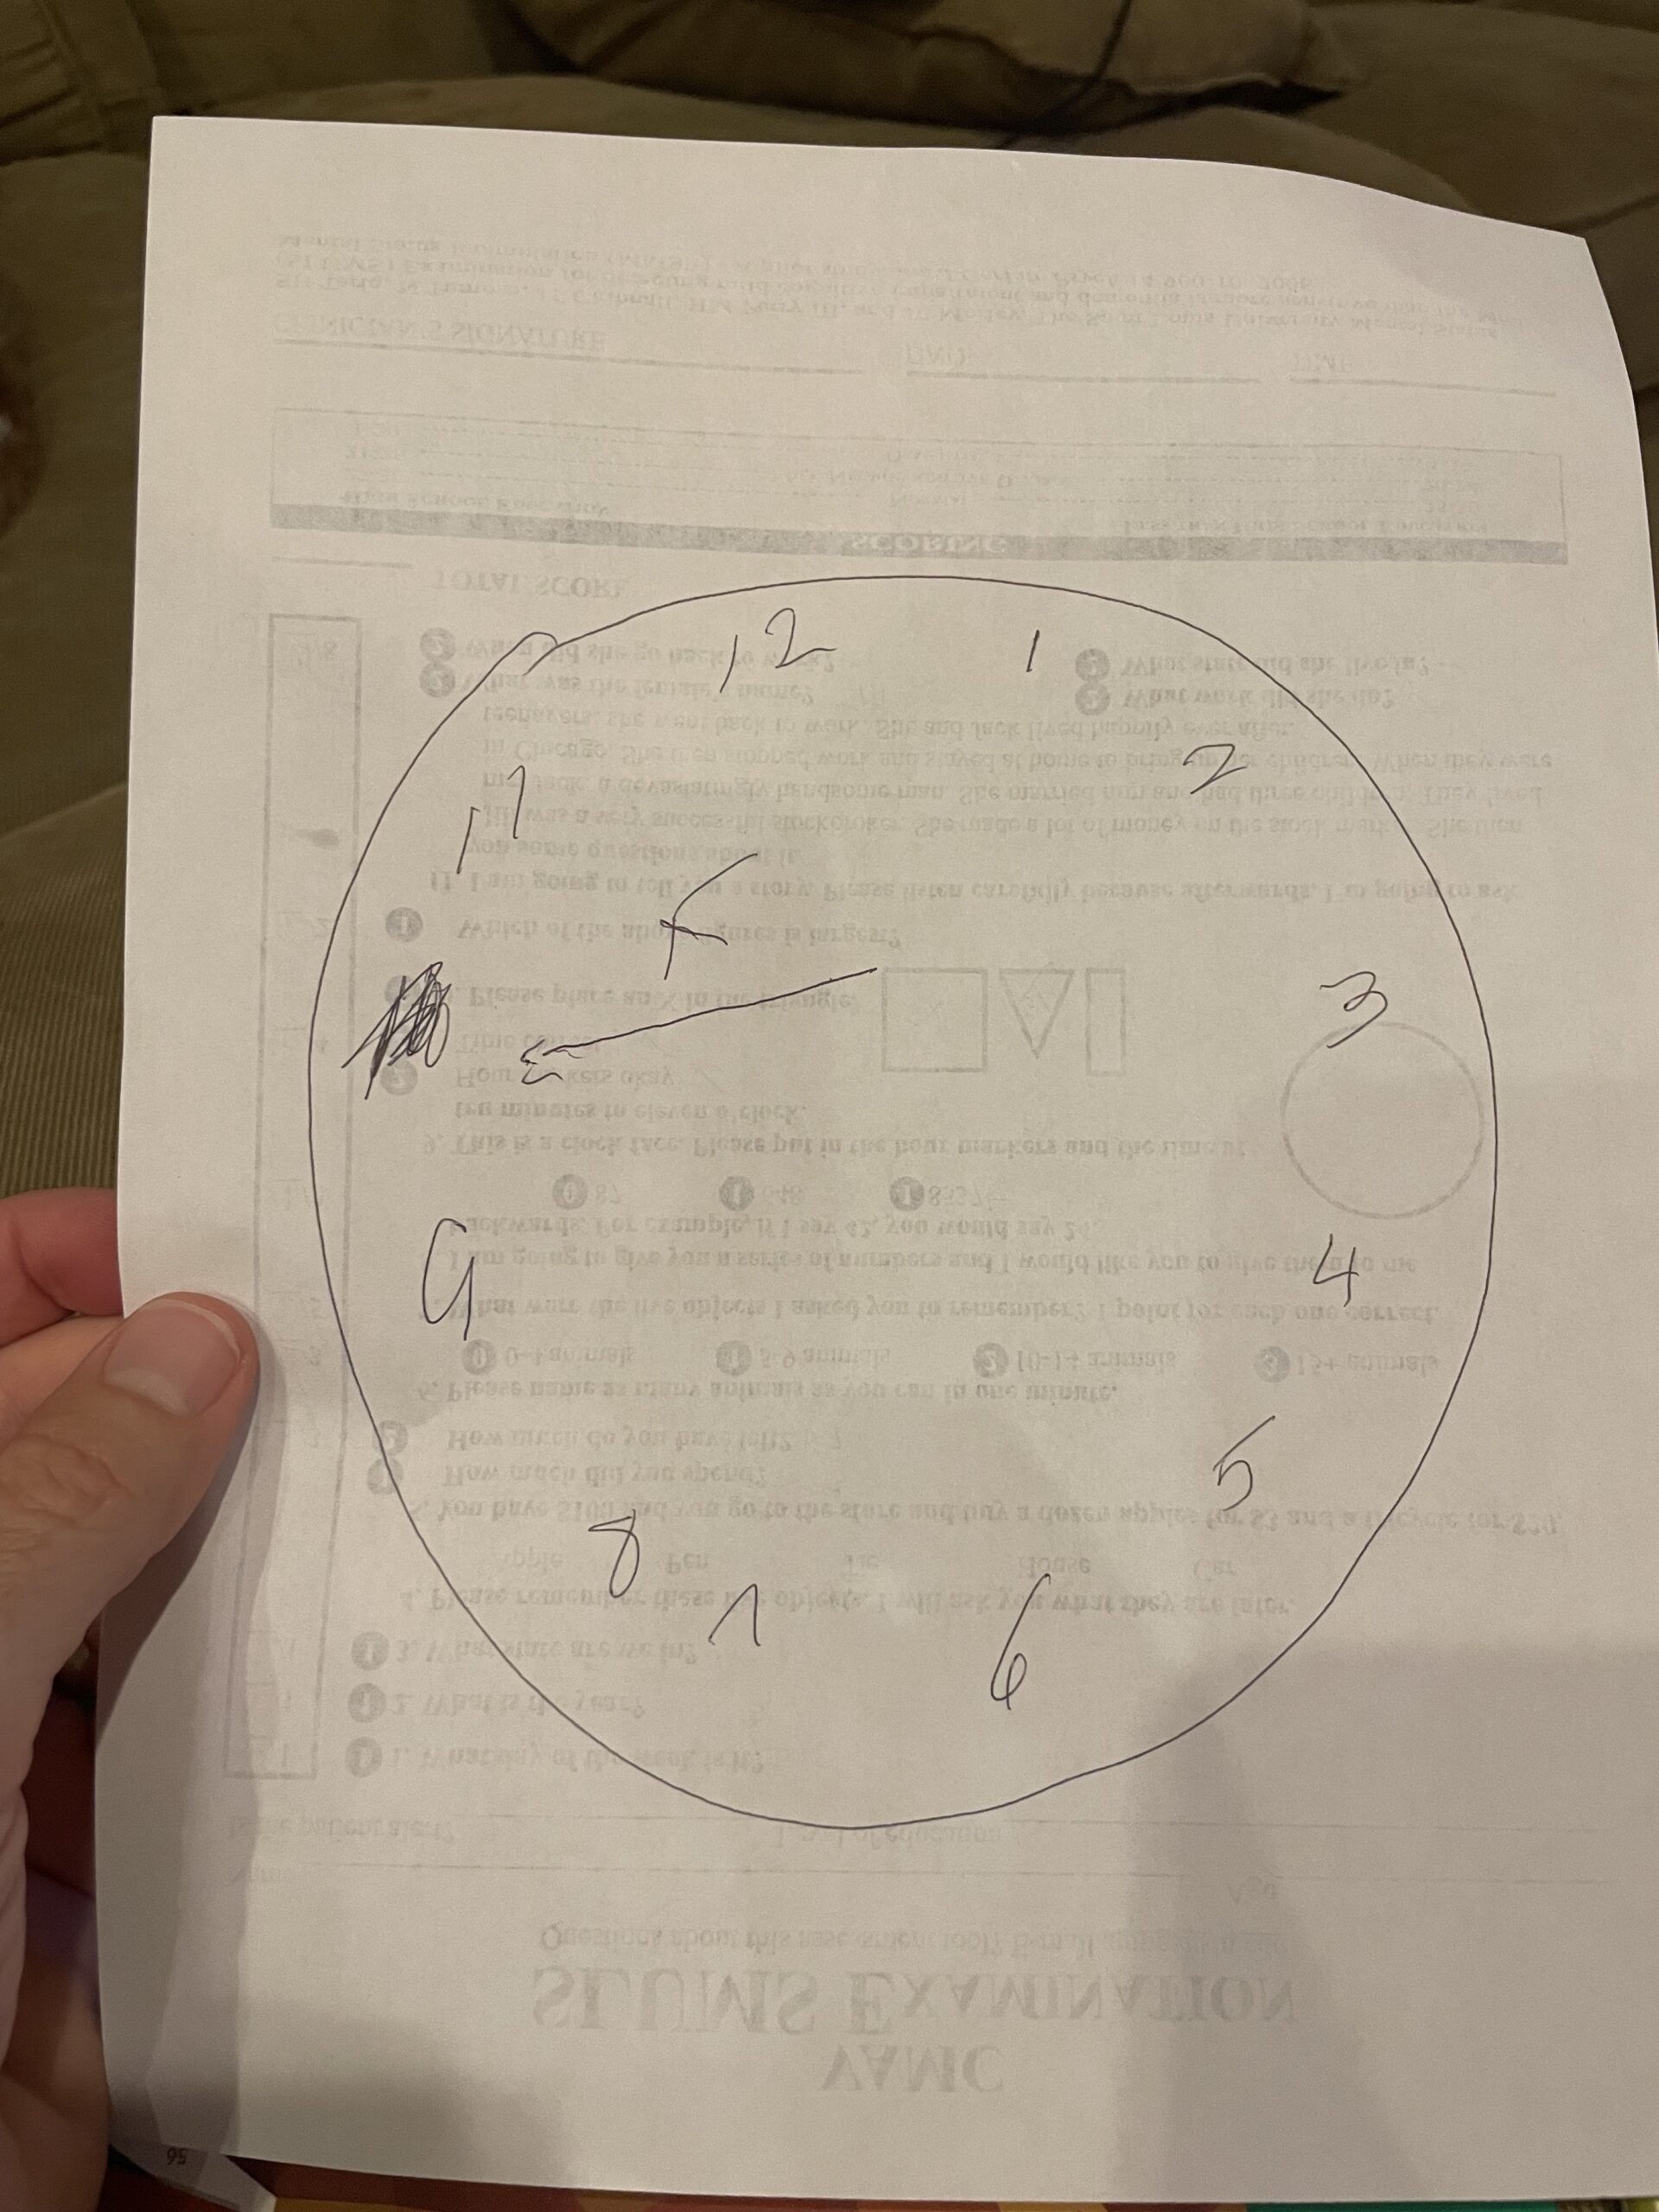 Our resident was able to draw a clock face